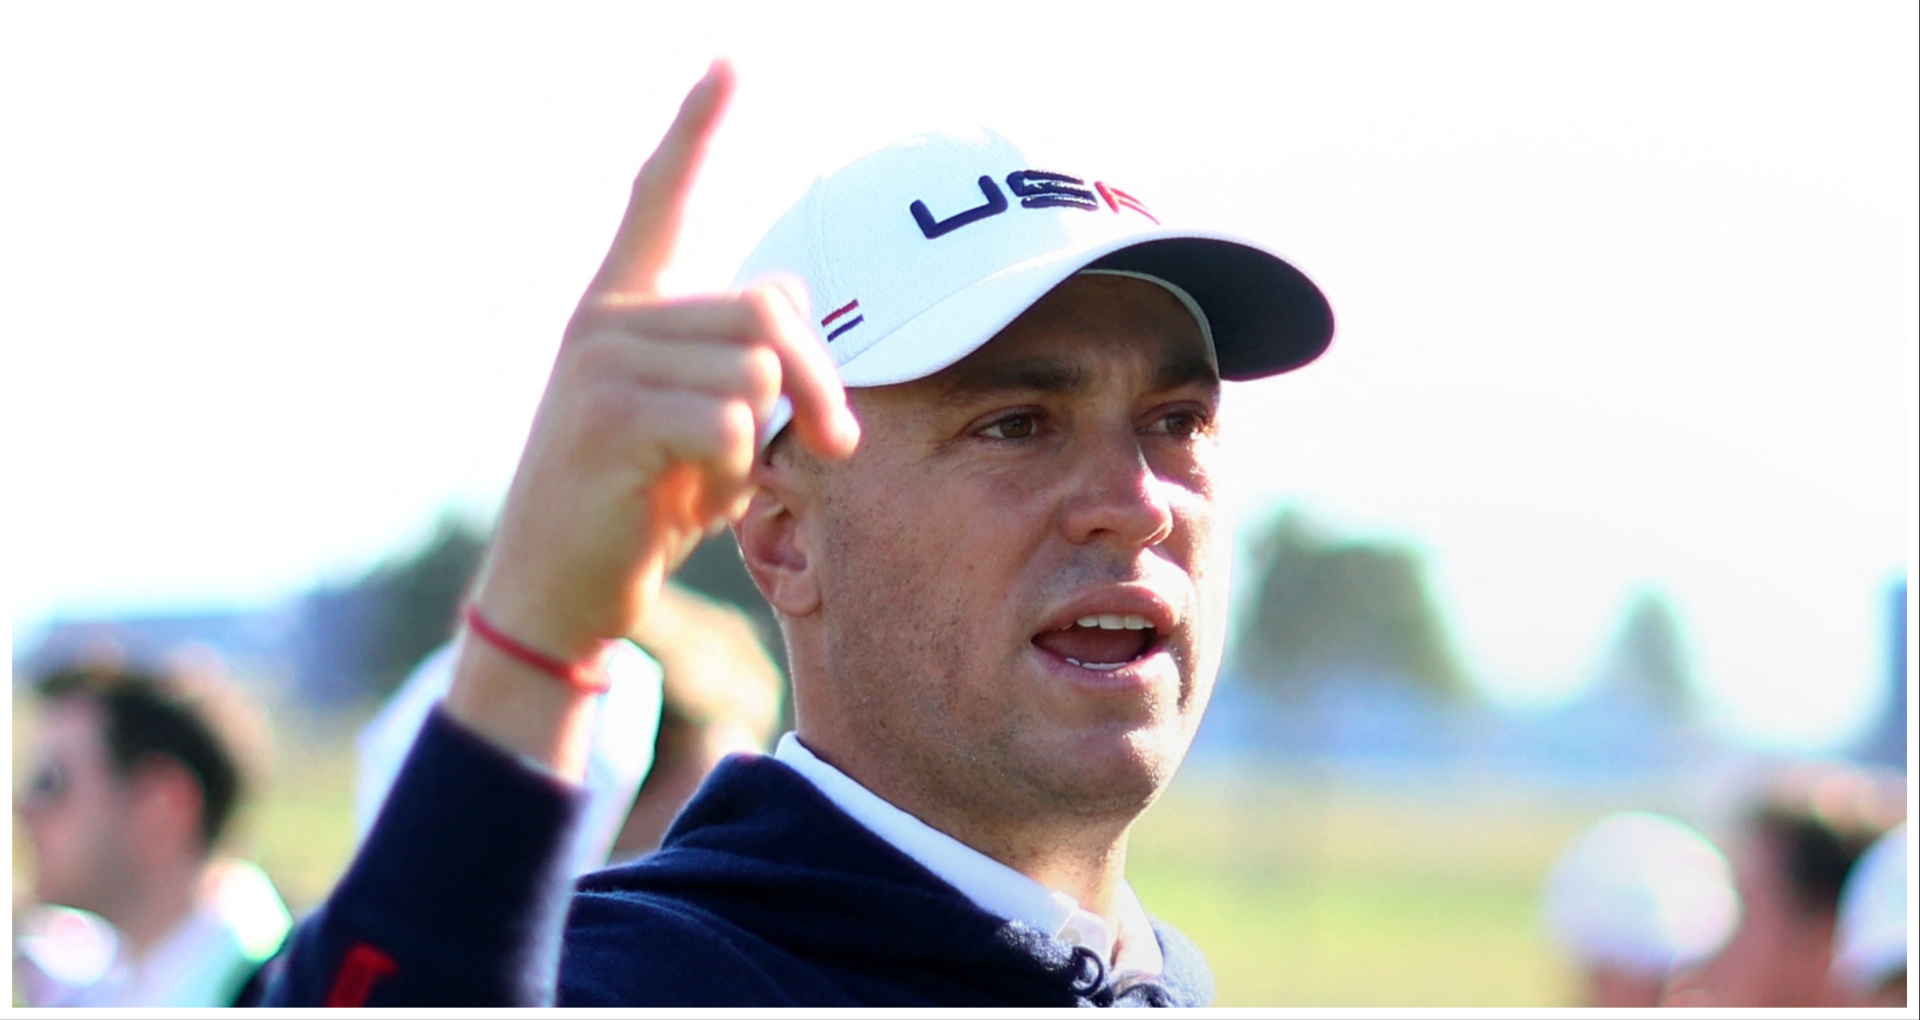 Justin Thomas becomes first U.S. golfer to give Ryder Cup crowd a piece of his mind